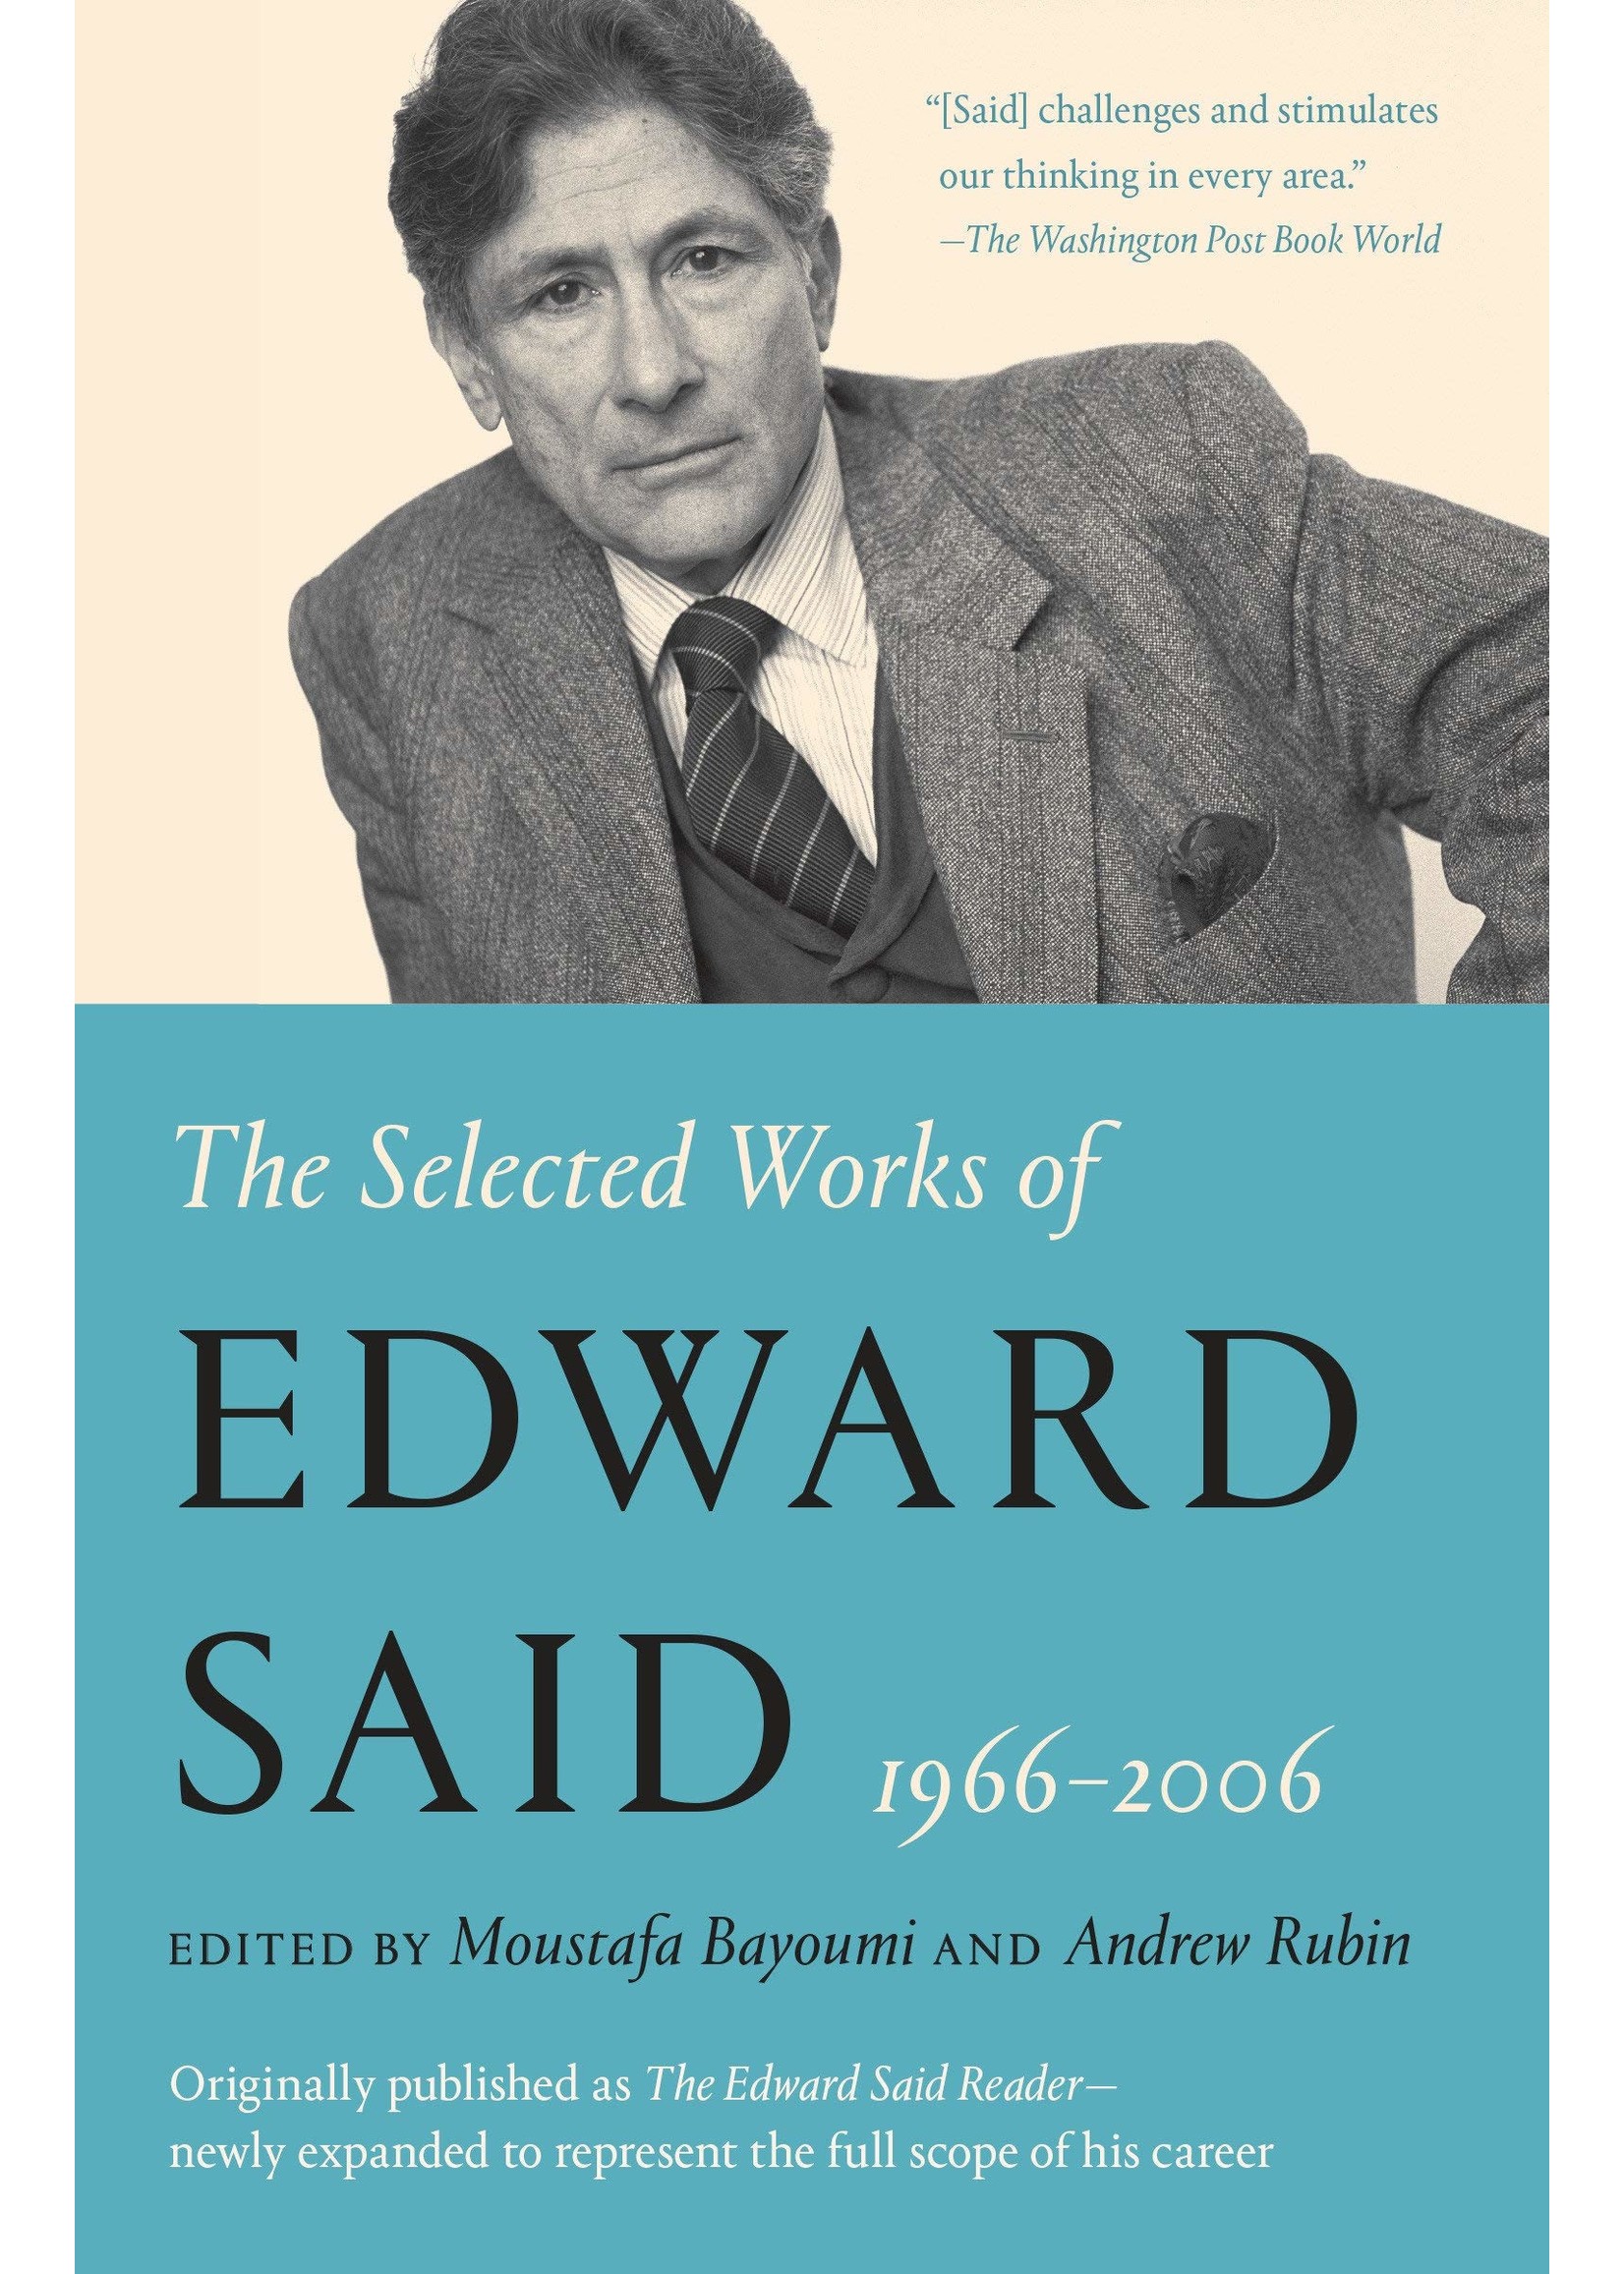 The Selected Works of Edward Said: 1966-2006